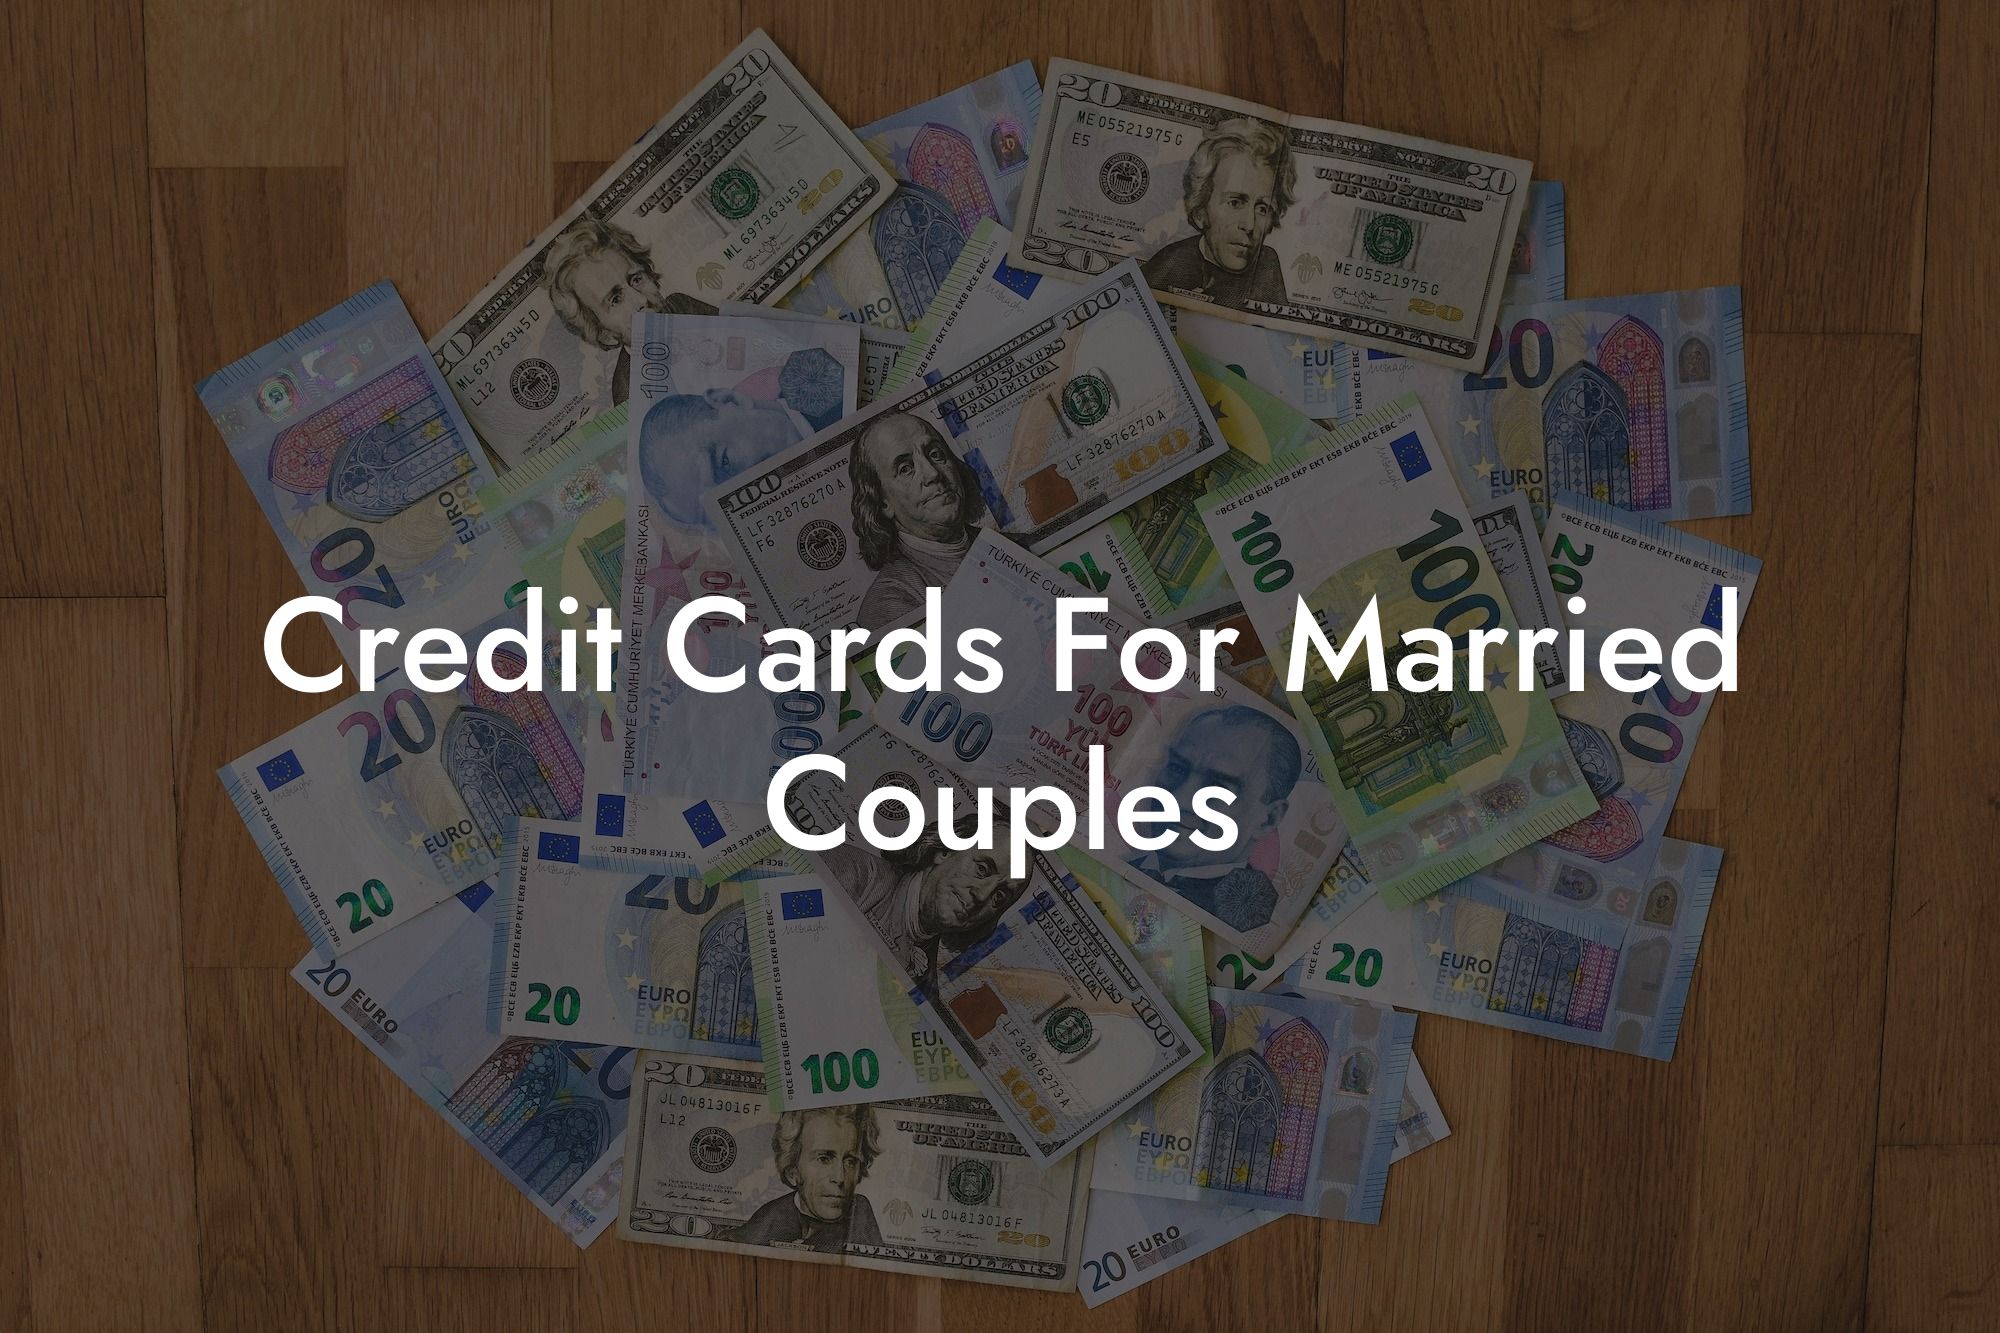 Credit Cards For Married Couples